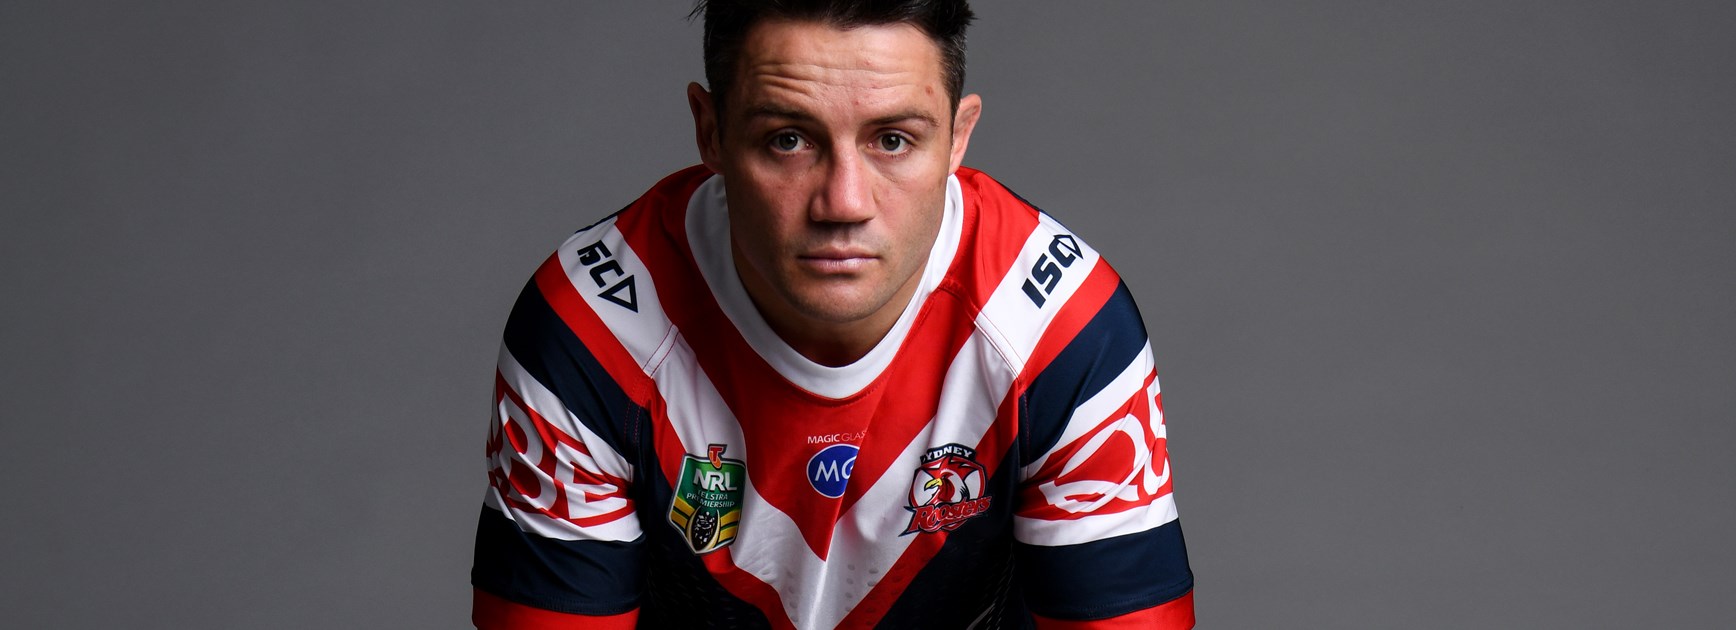 Stat Attack: Cronk an ironman - 18 games missed in 13 seasons